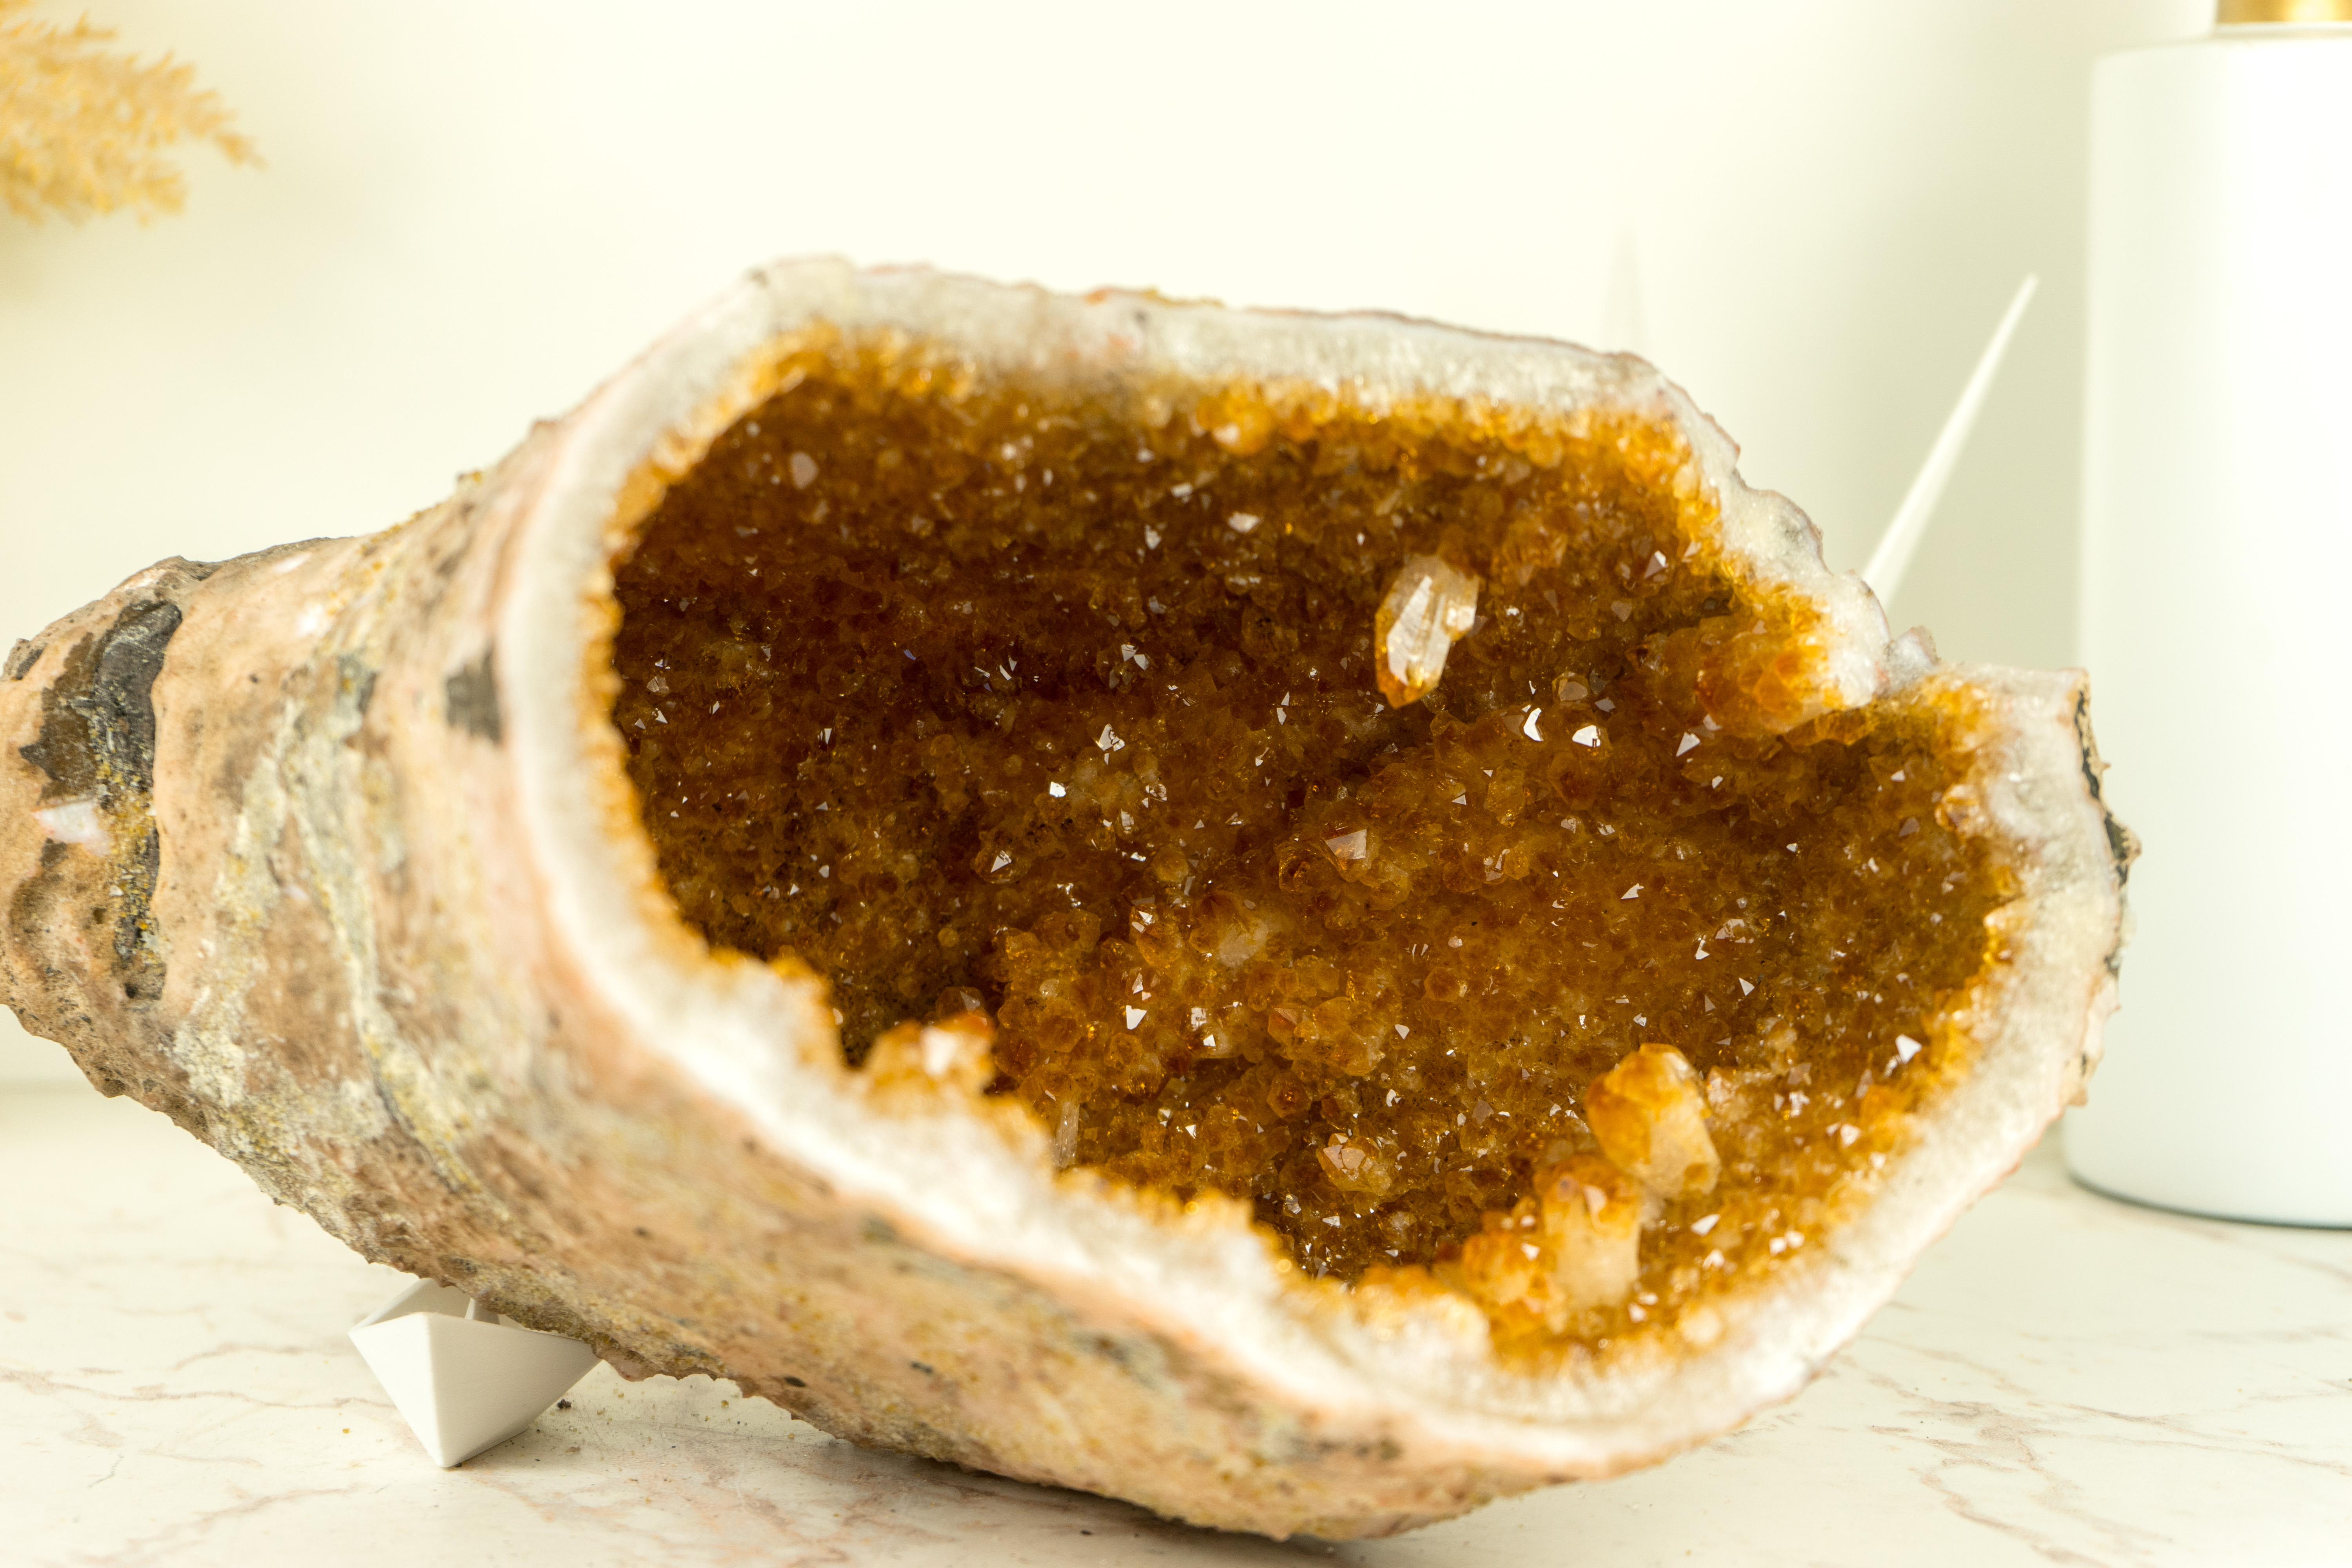 With its golden orange color tone and natural, beautiful cave-like shape, this Citrine Geode is a fabulous specimen that showcases rare characteristics. It is undoubtedly a stunning Citrine that will serve as a remarkable accent piece, seamlessly